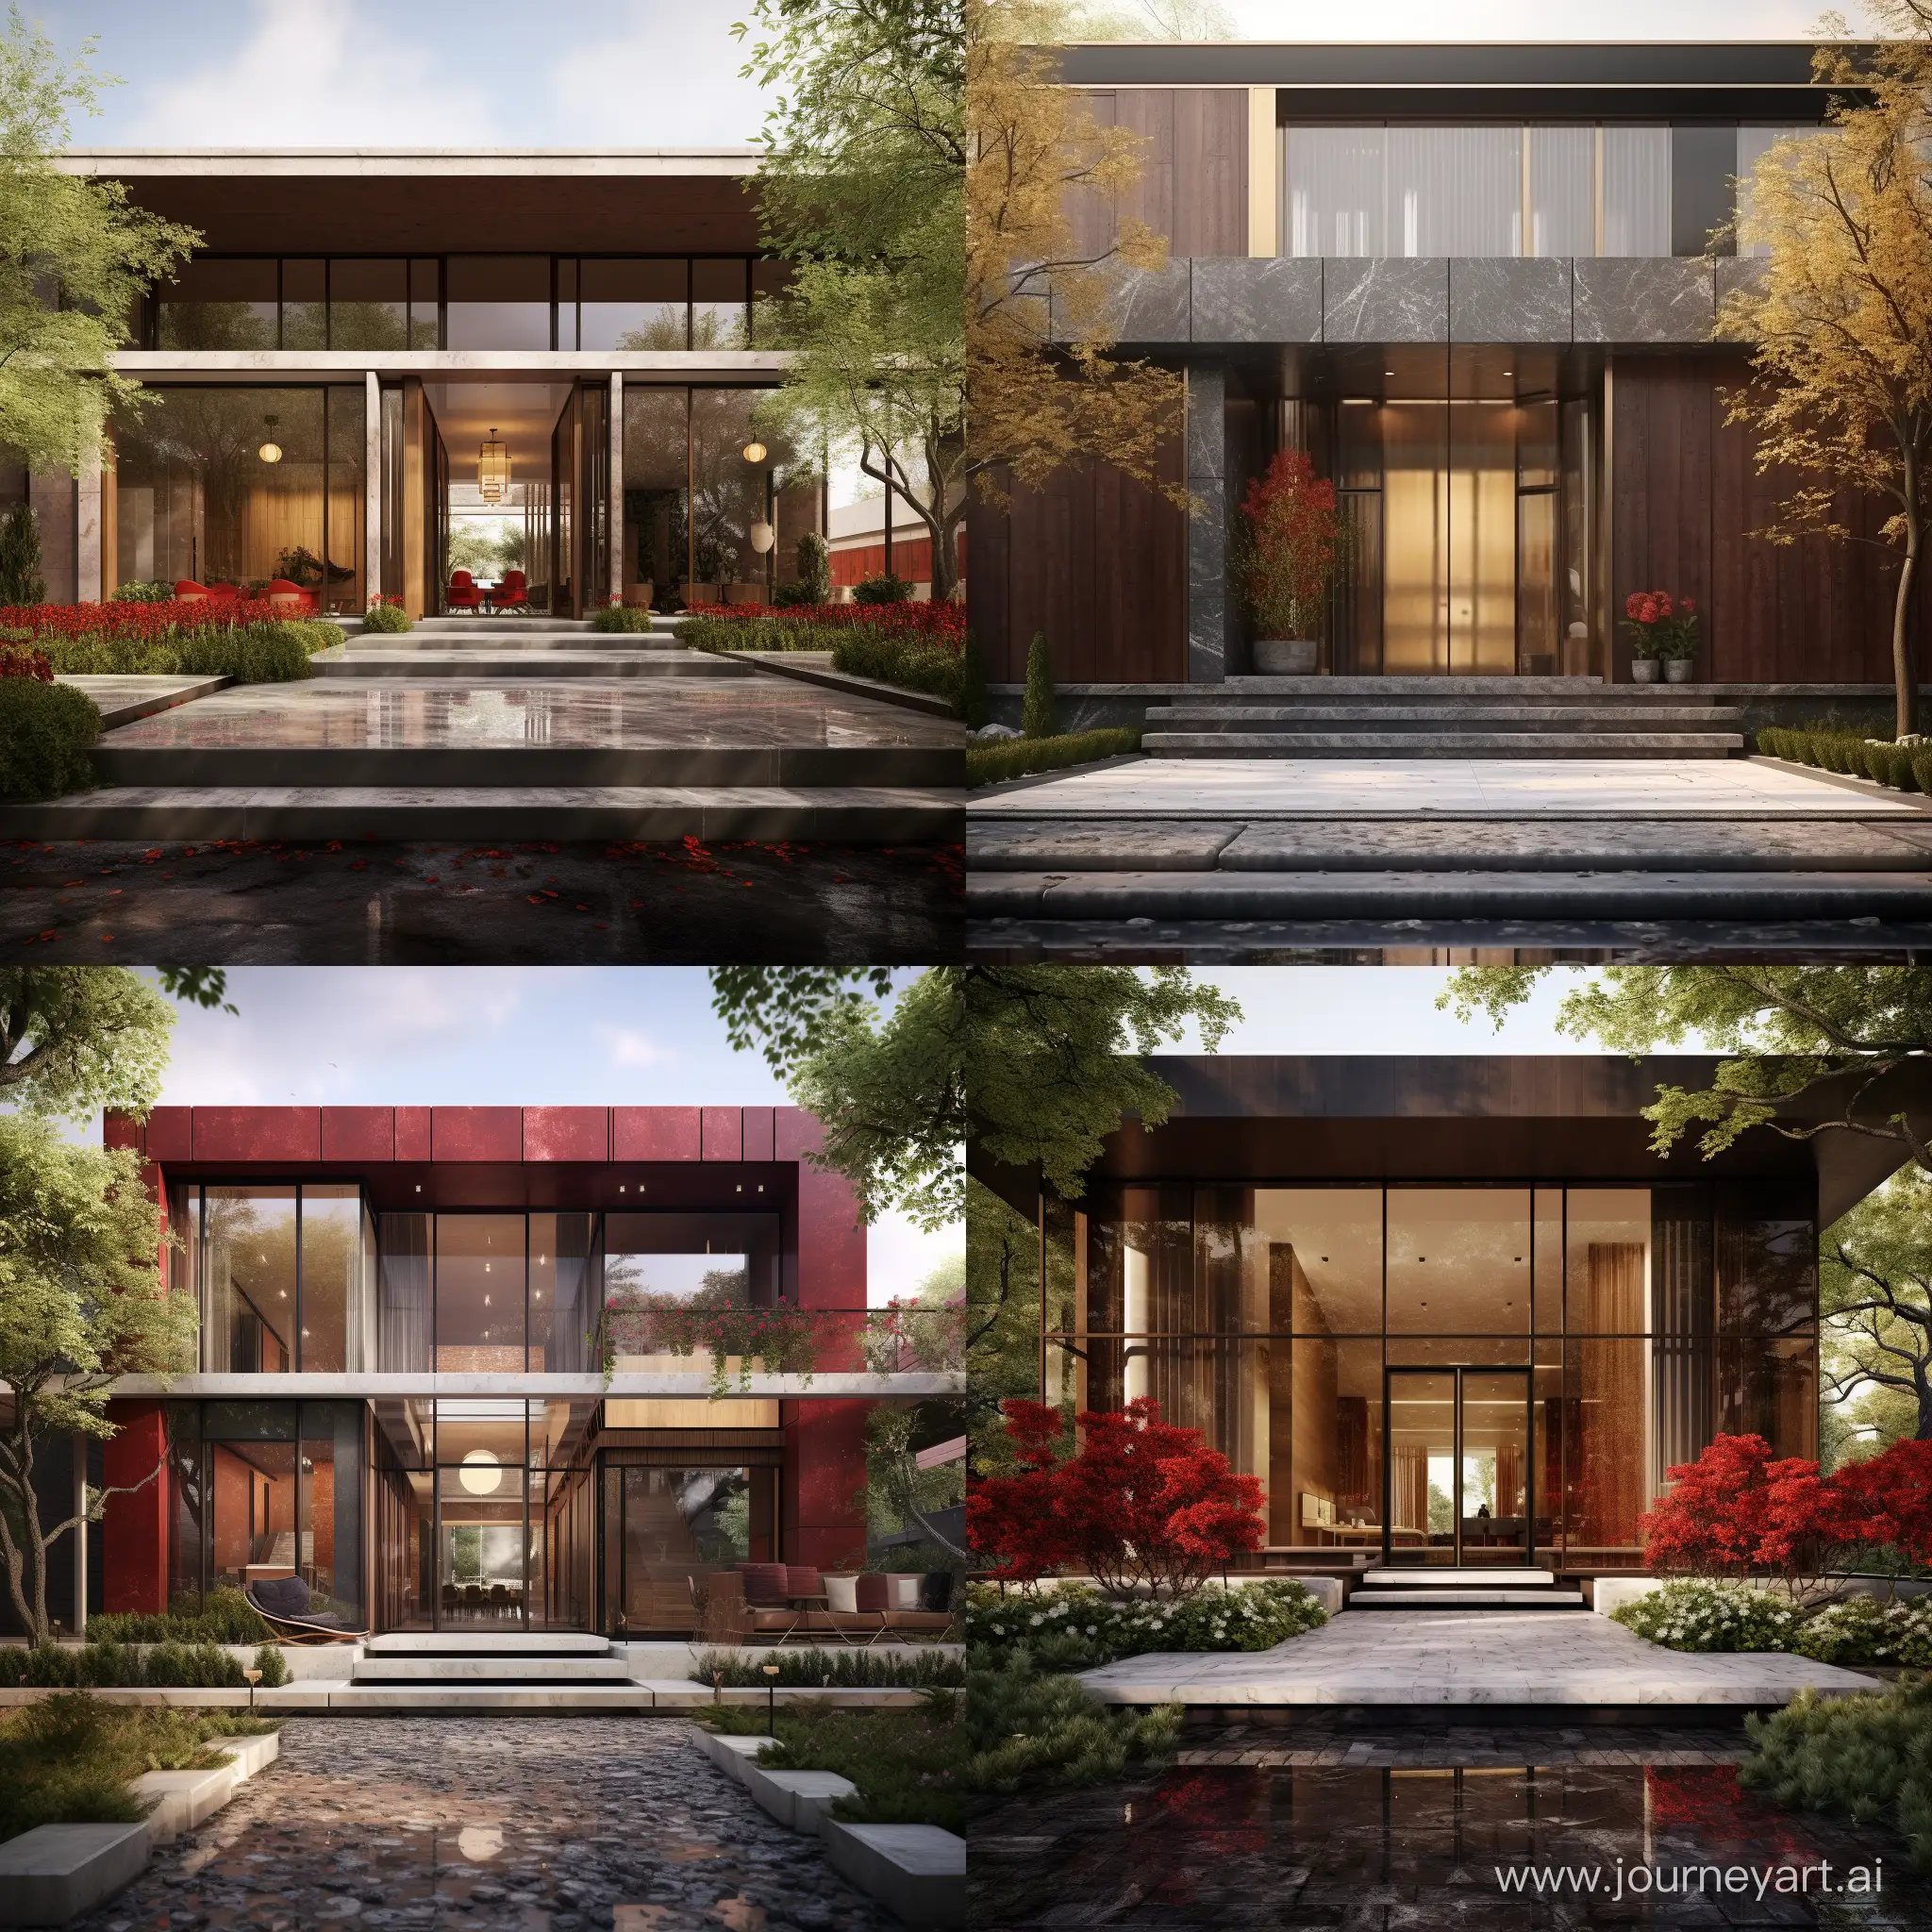  Image style Hyper realistic vray render .  view port/style  exterior view .Camera setting  Nikon d 850 . subject residential building ten floors .subject material brick wall Red Entrance door in the middle and marble ceram teravertine and textured rock The glass, like the glass of Prince Mahan's garden and the sash glass (Iran), are colored Iranian glass, and in the case of the glass, the stone shape of the windows is completely Iranian architecture. From Persepolis Persepolis Taq-e Bostan . Iranian architecture with the combination of modern and contemporary architecture, so that it can be said that the architecture of this place is based on Iranian architecture and its combination with post-modern, so that the spirit of the present time can be observed in it, along with completely Iranian architecture.. subject description   curves lines on the right hand side Above the entrance door curvilinear wall Statue of Mitra and Ahura Mazda like Persepolis (Achaemenid Homa statue in Persepolis The entrance door is like a round arch with Iranian architectural carvings but in Box model . Scene At the entrance of the stone pavement and next to the gardens like the Iranian gardens with a blue Persian tile on the side and behind the tower building in the center of the city, this house should be in an alley like Tehran's Niavaran neighborhood or Los Angeles' Beverly Hills. . Futuristic landscape . Atmosphere / light Golden hour lighting . aspect ratio 16:9